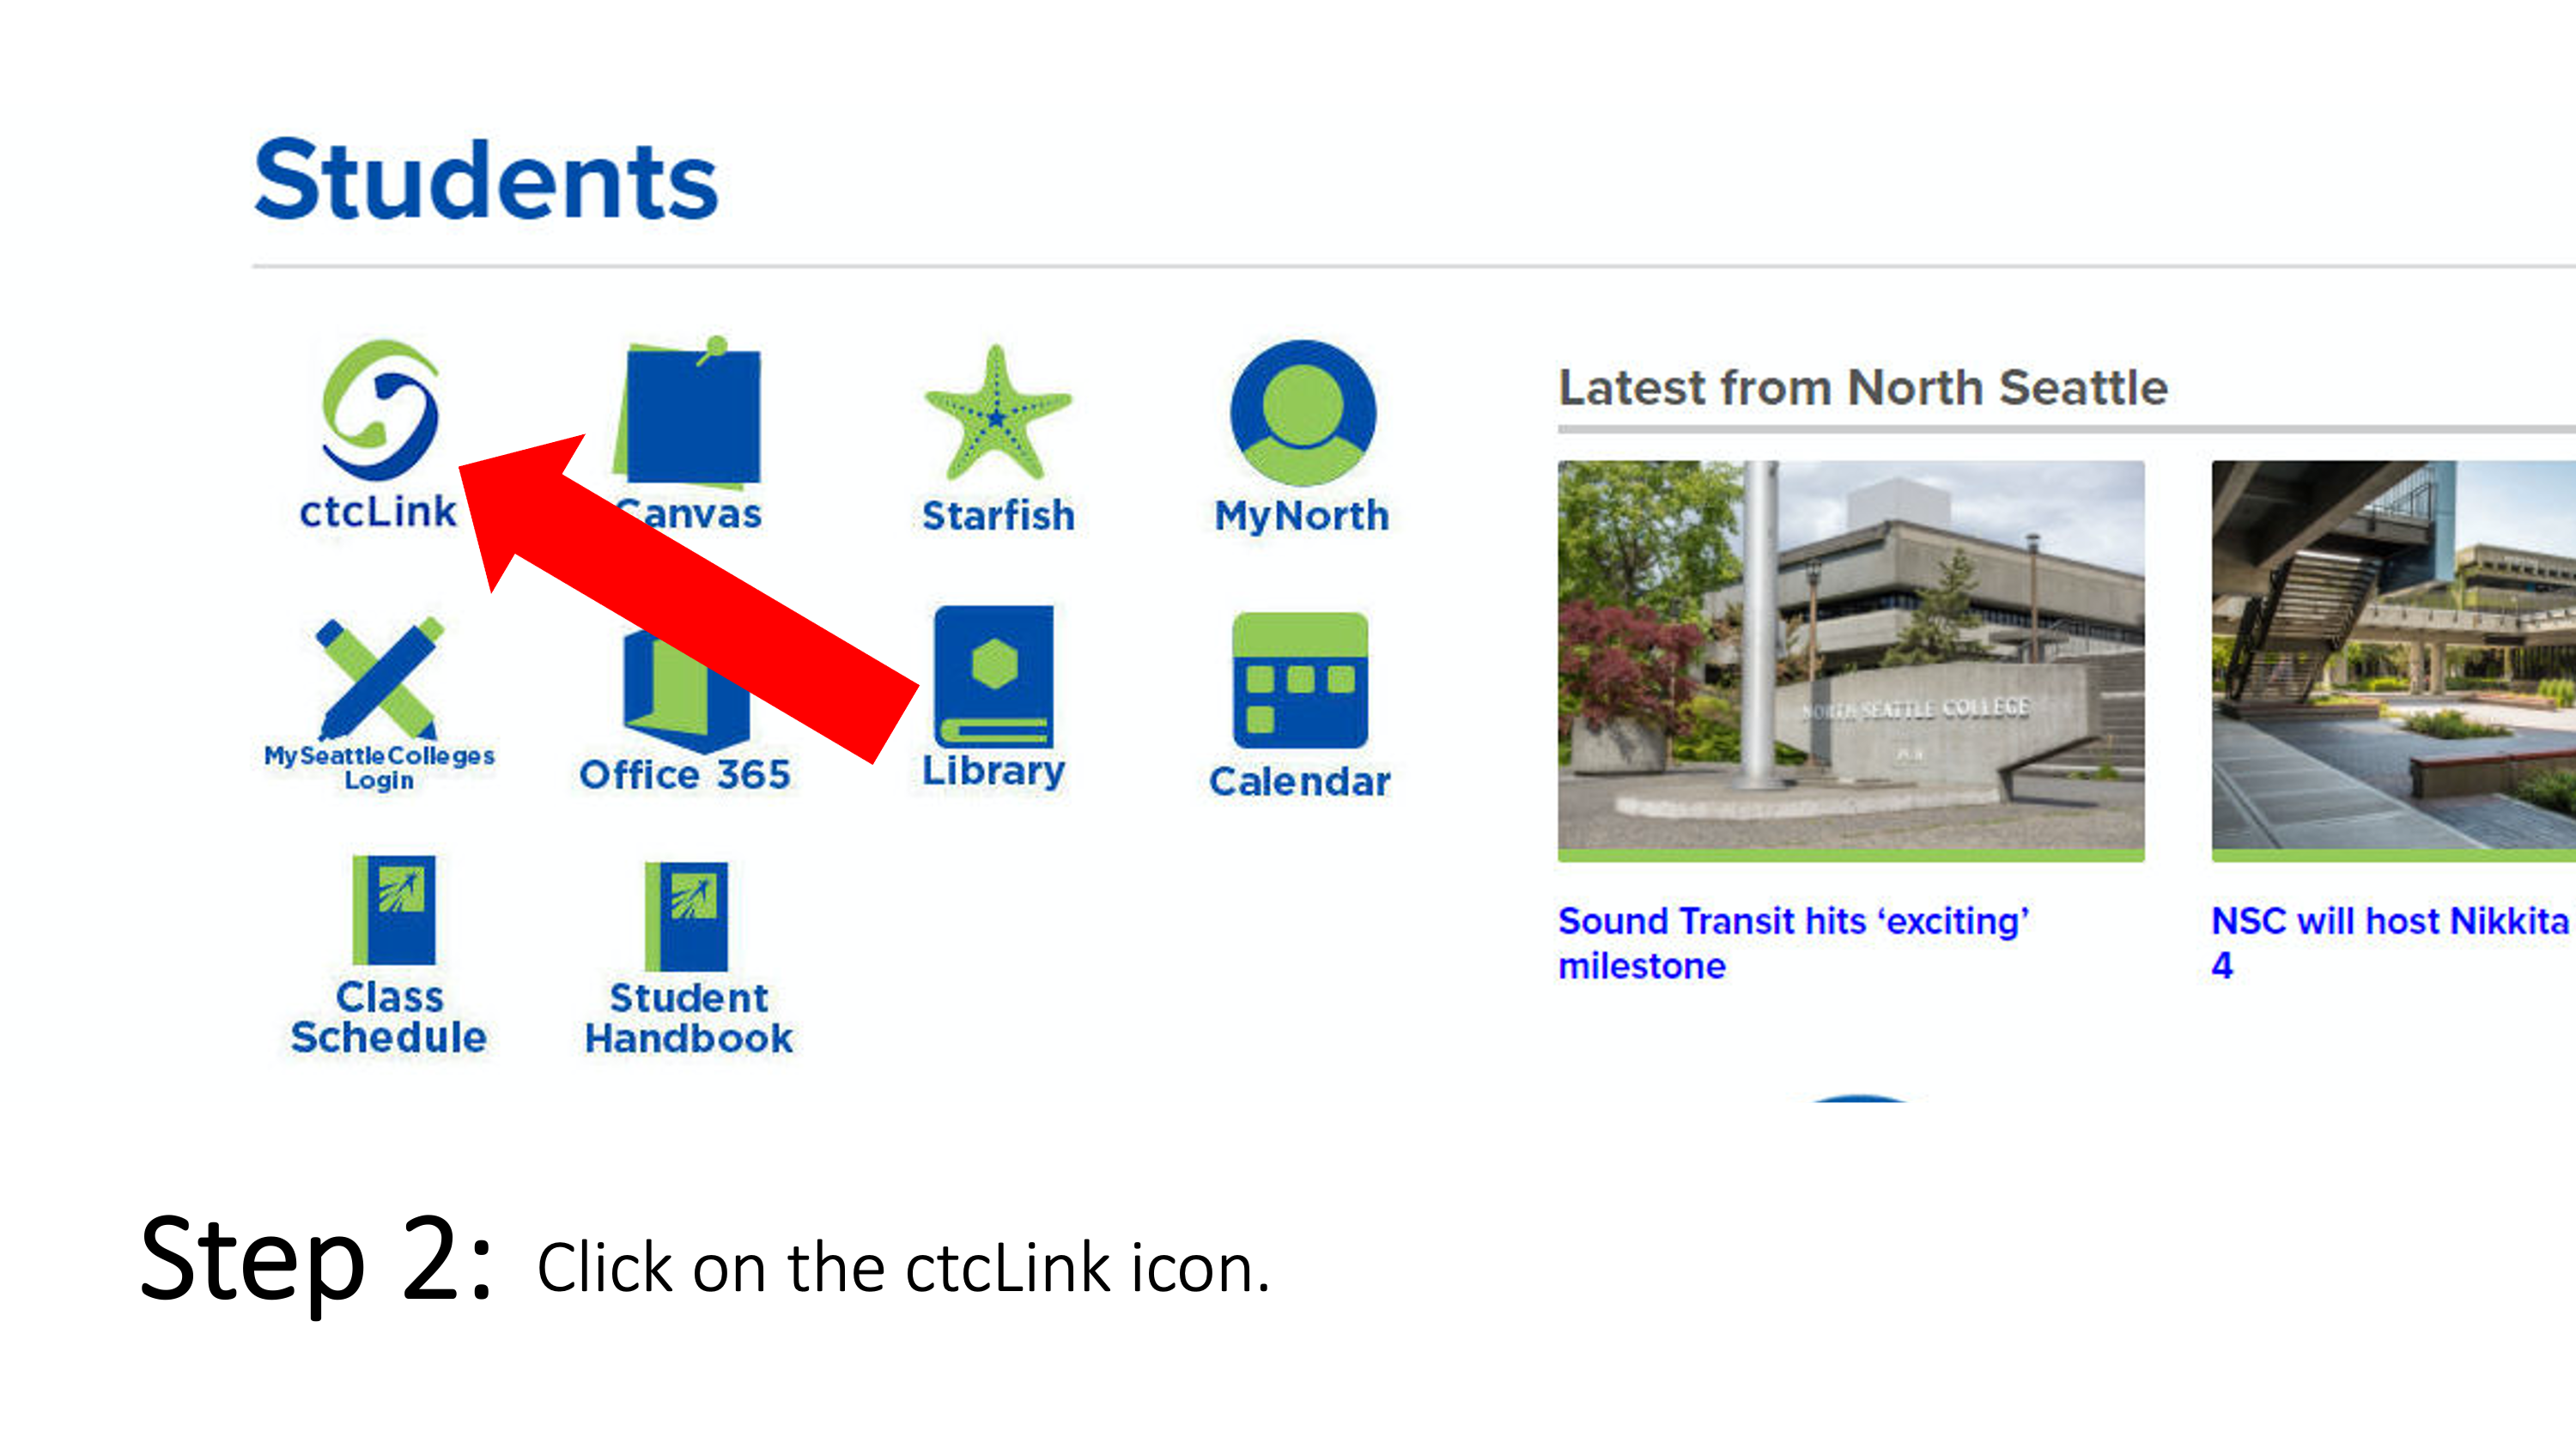 Click on the ctcLink icon on the Students page.